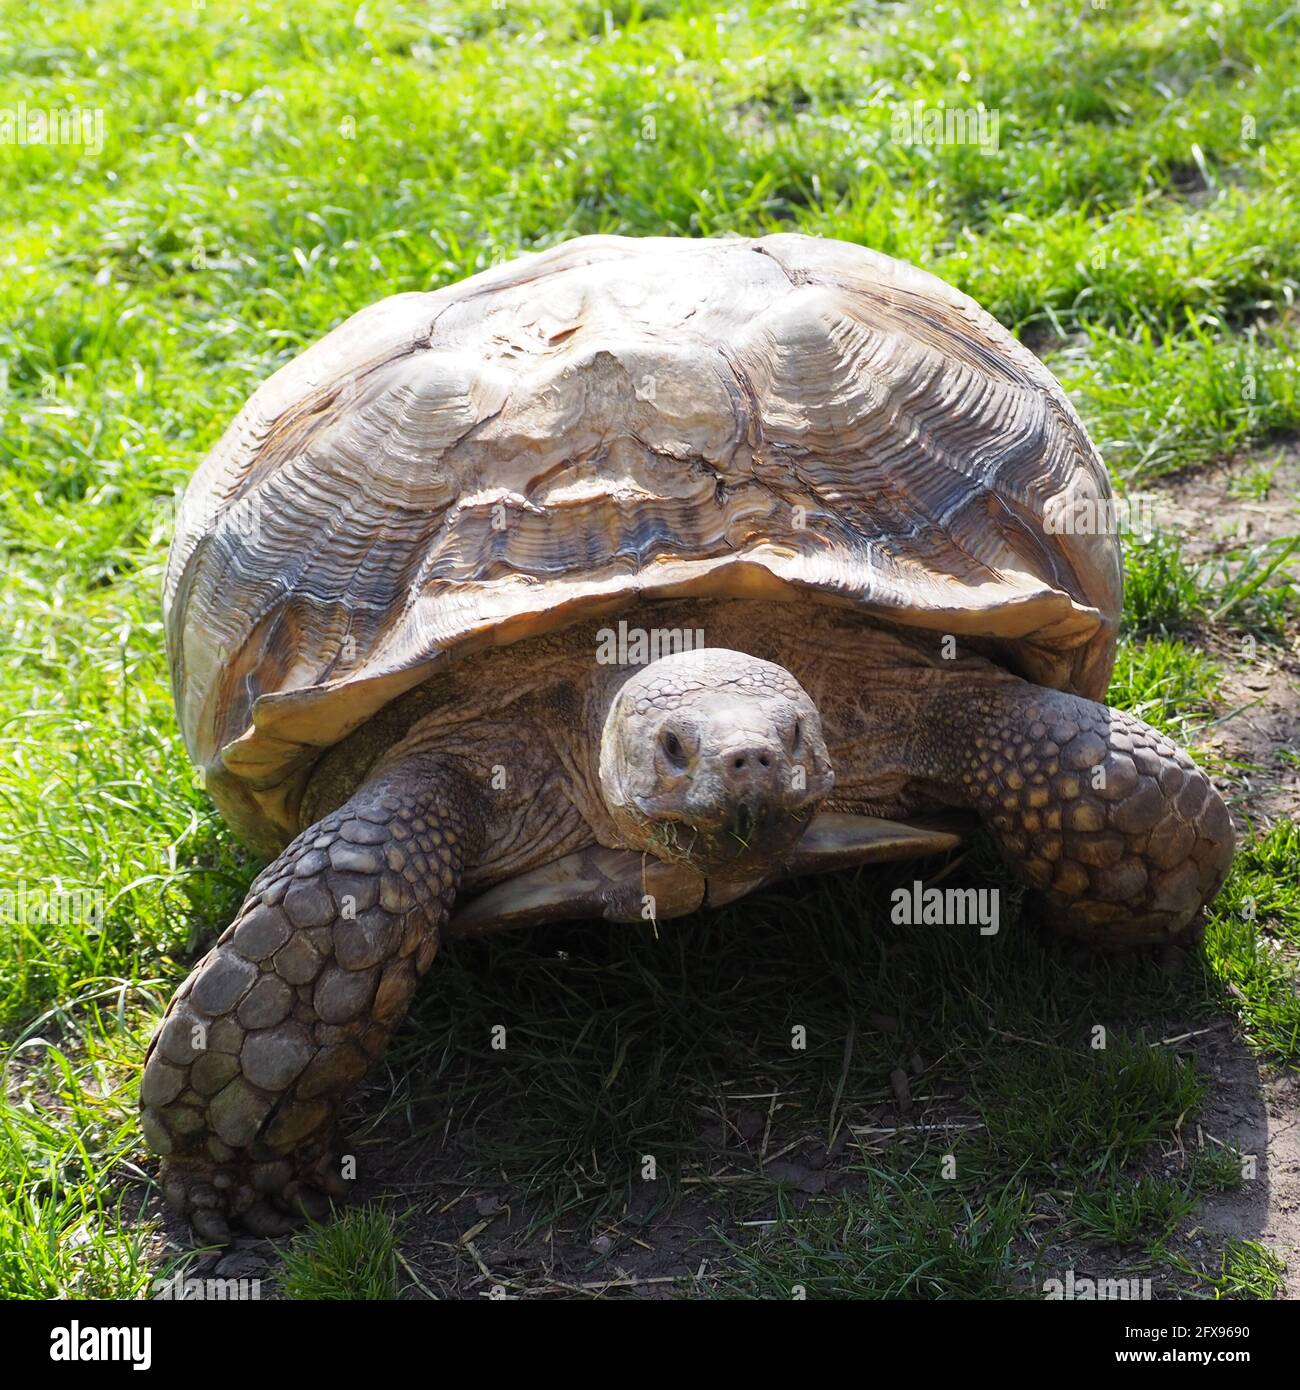 Jack the African Spurred Tortoise taking a stroll Stock Photo